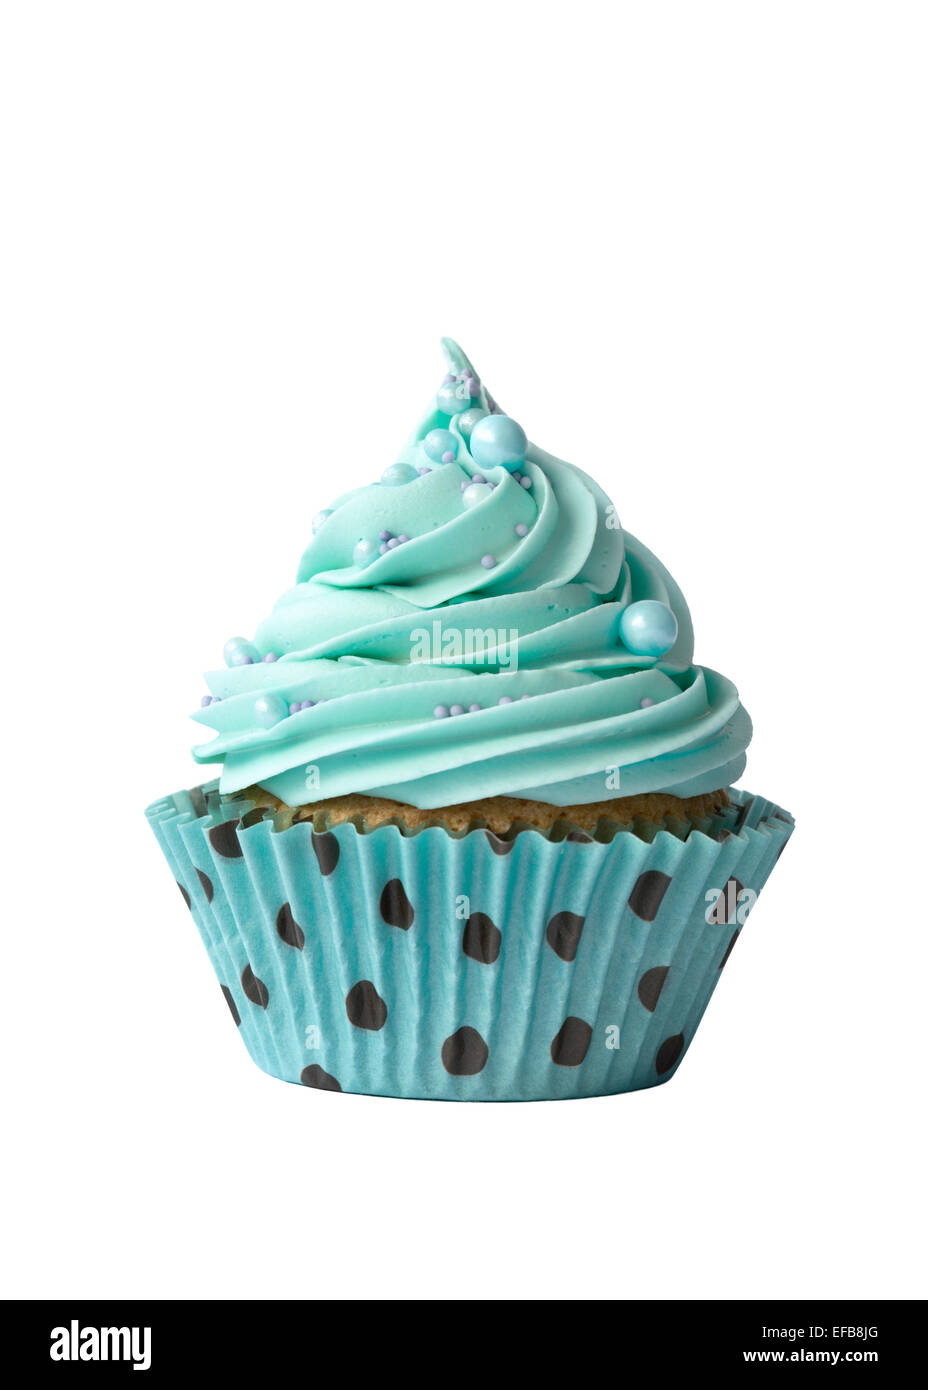 Cupcake decorated with turquoise frosting Stock Photo